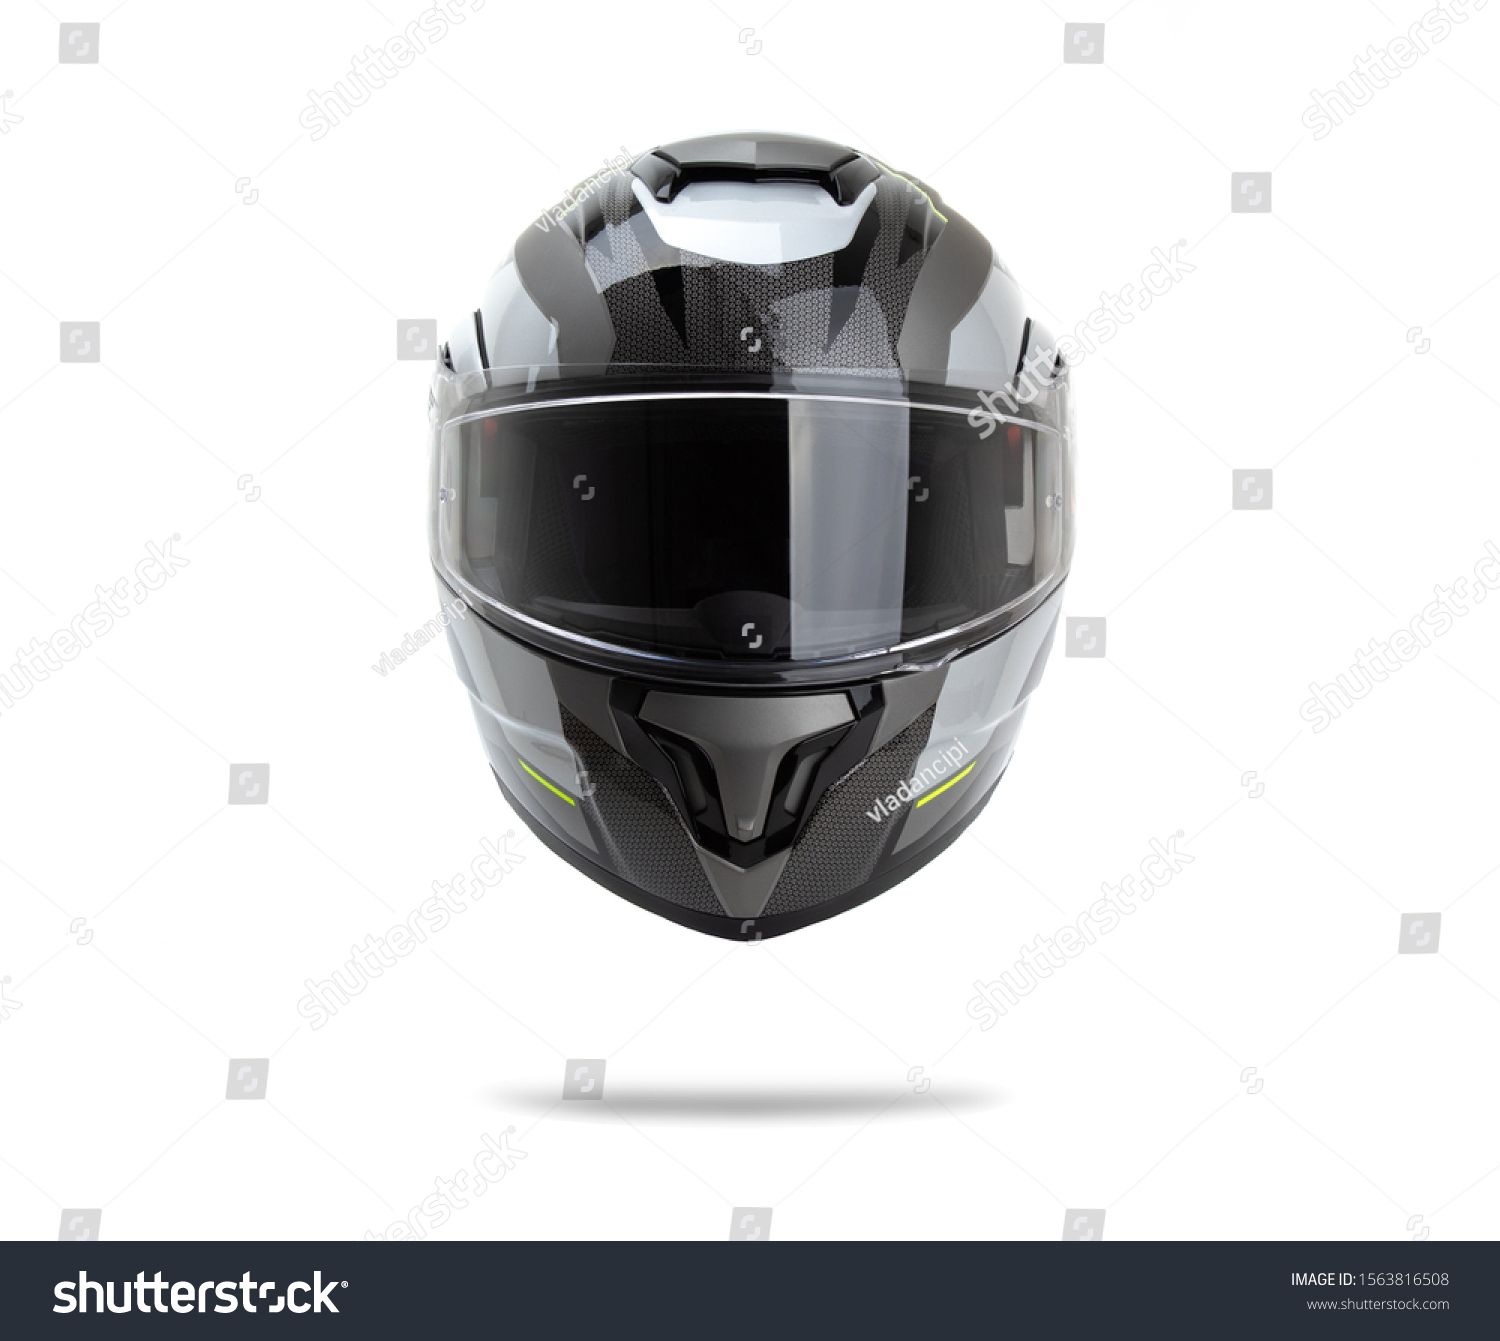 Gray motorcycle helmet isolated on white background #1563816508